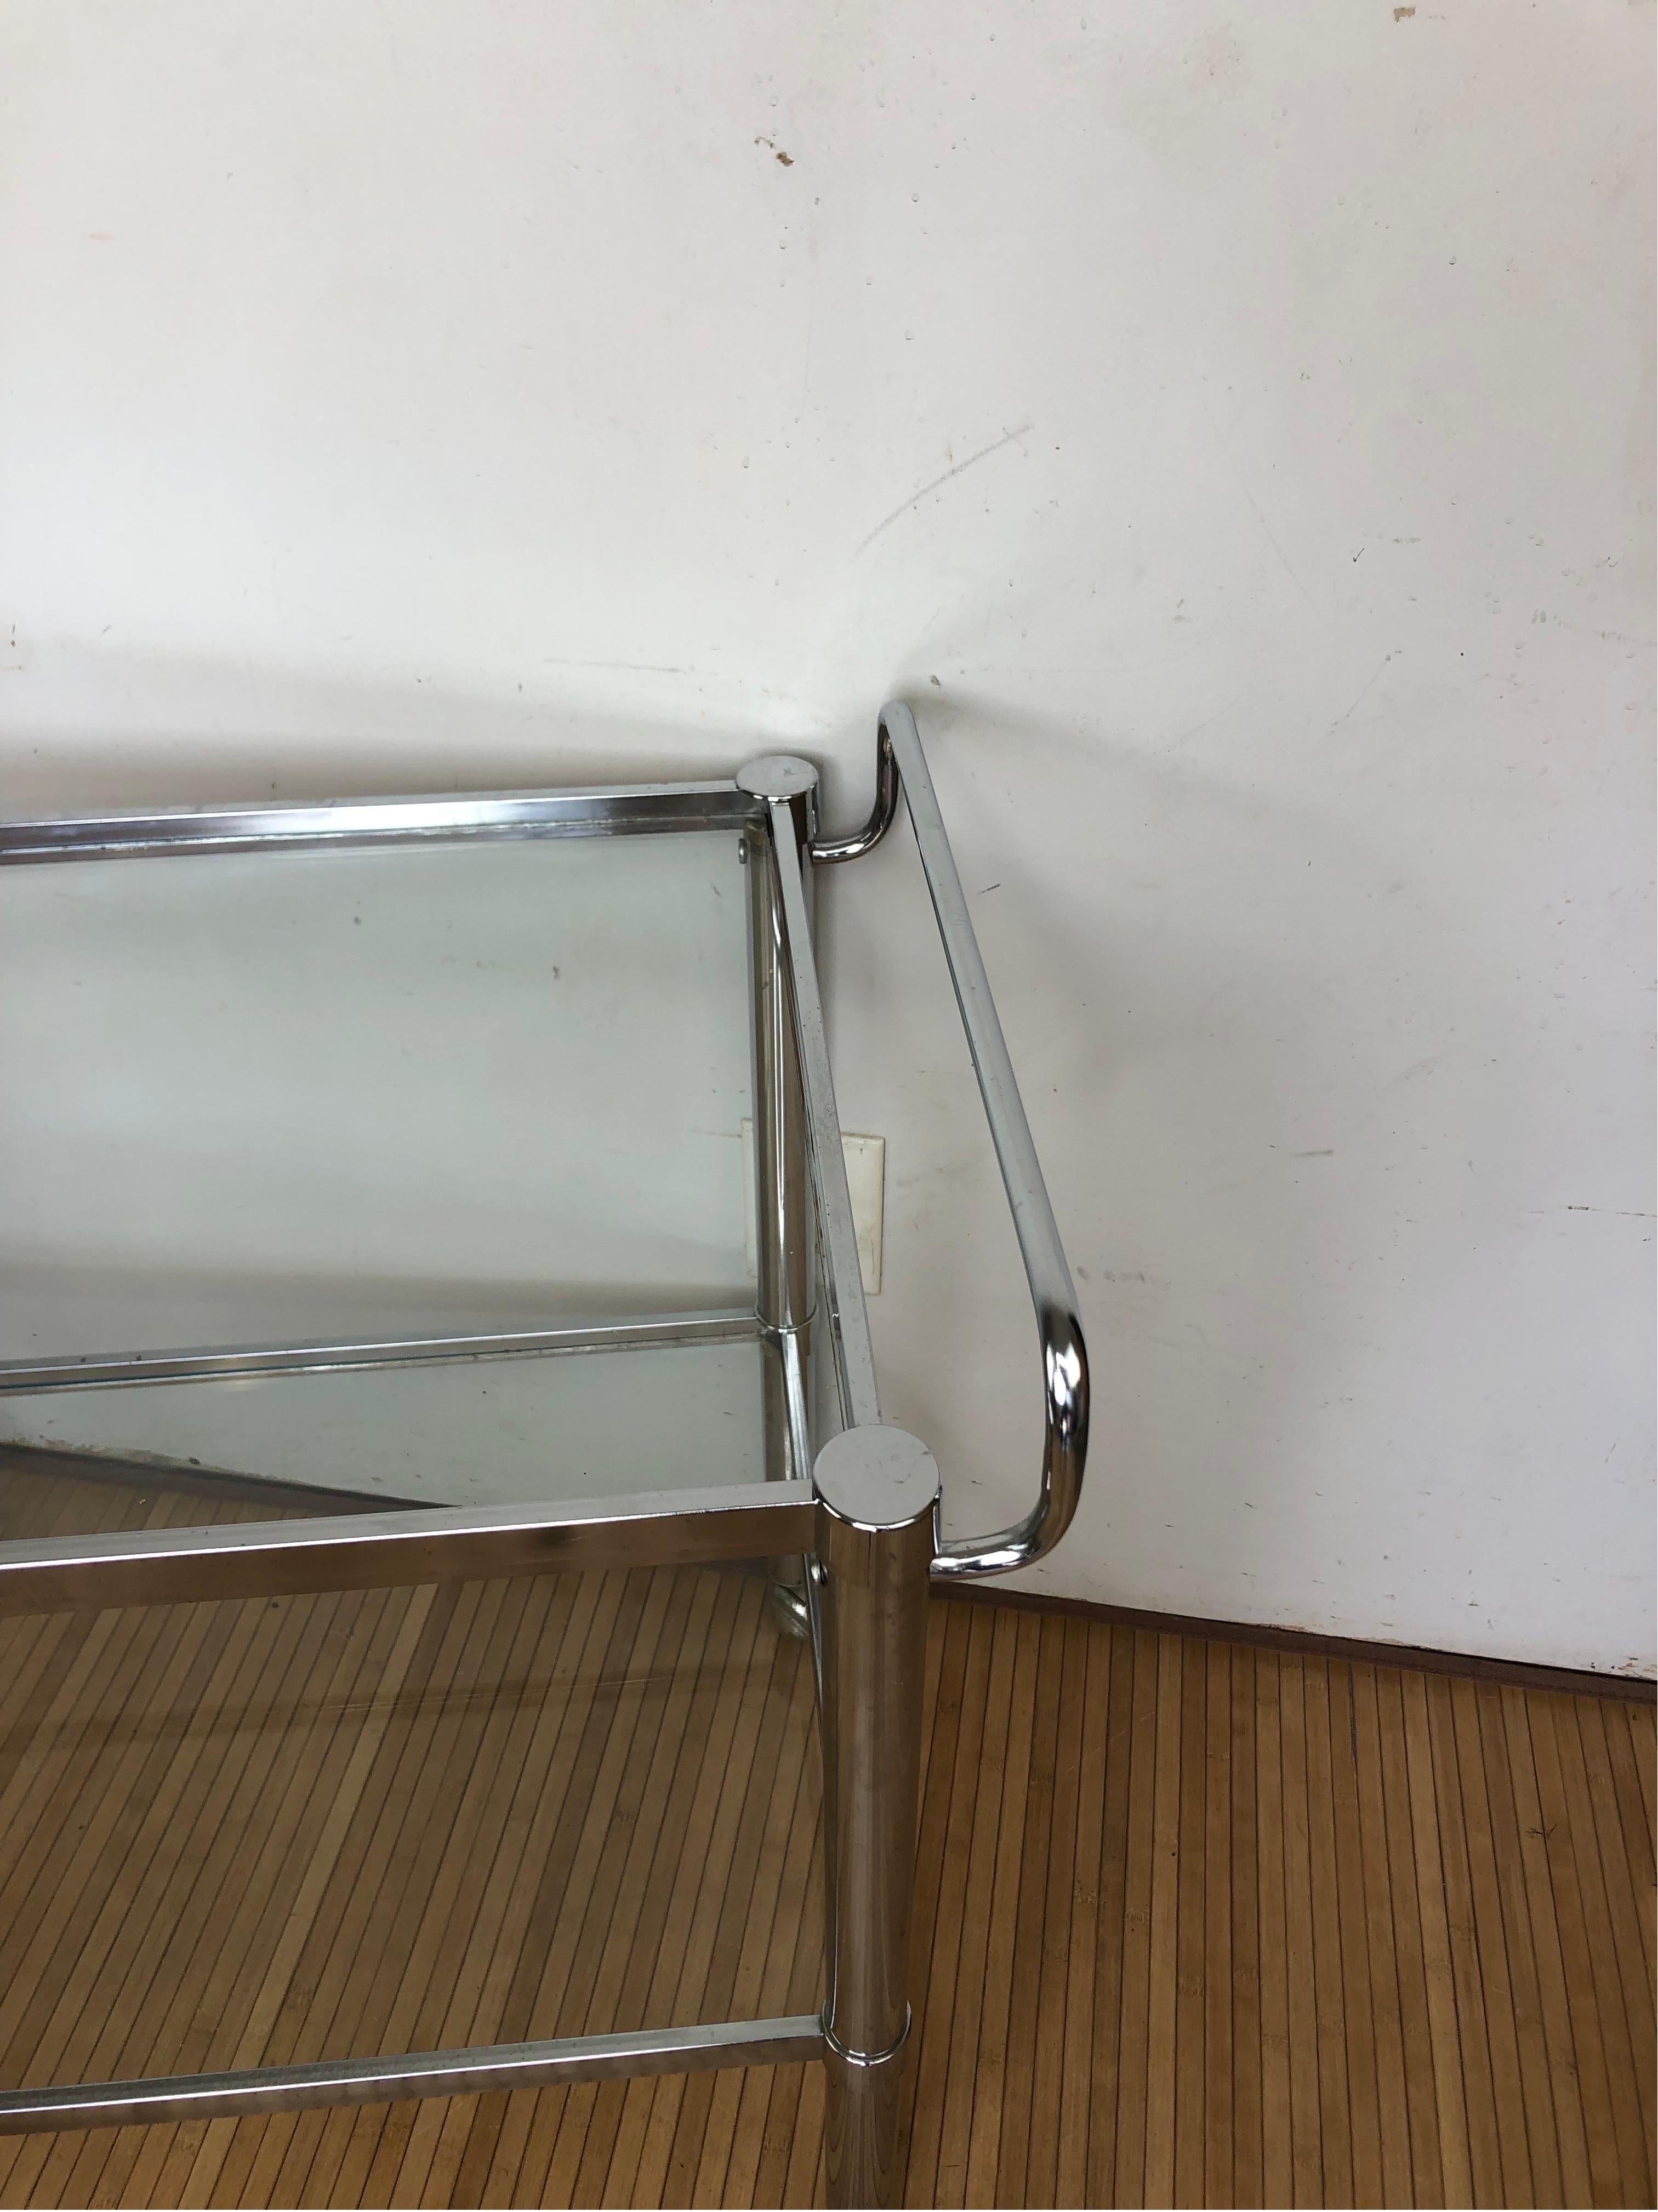 This vintage mid-century glass and chrome bar cart is a stylish and functional piece of furniture that would be a great addition to any home. The cart is made of clear glass and chrome, and has a simple yet elegant design. It has two shelves, one